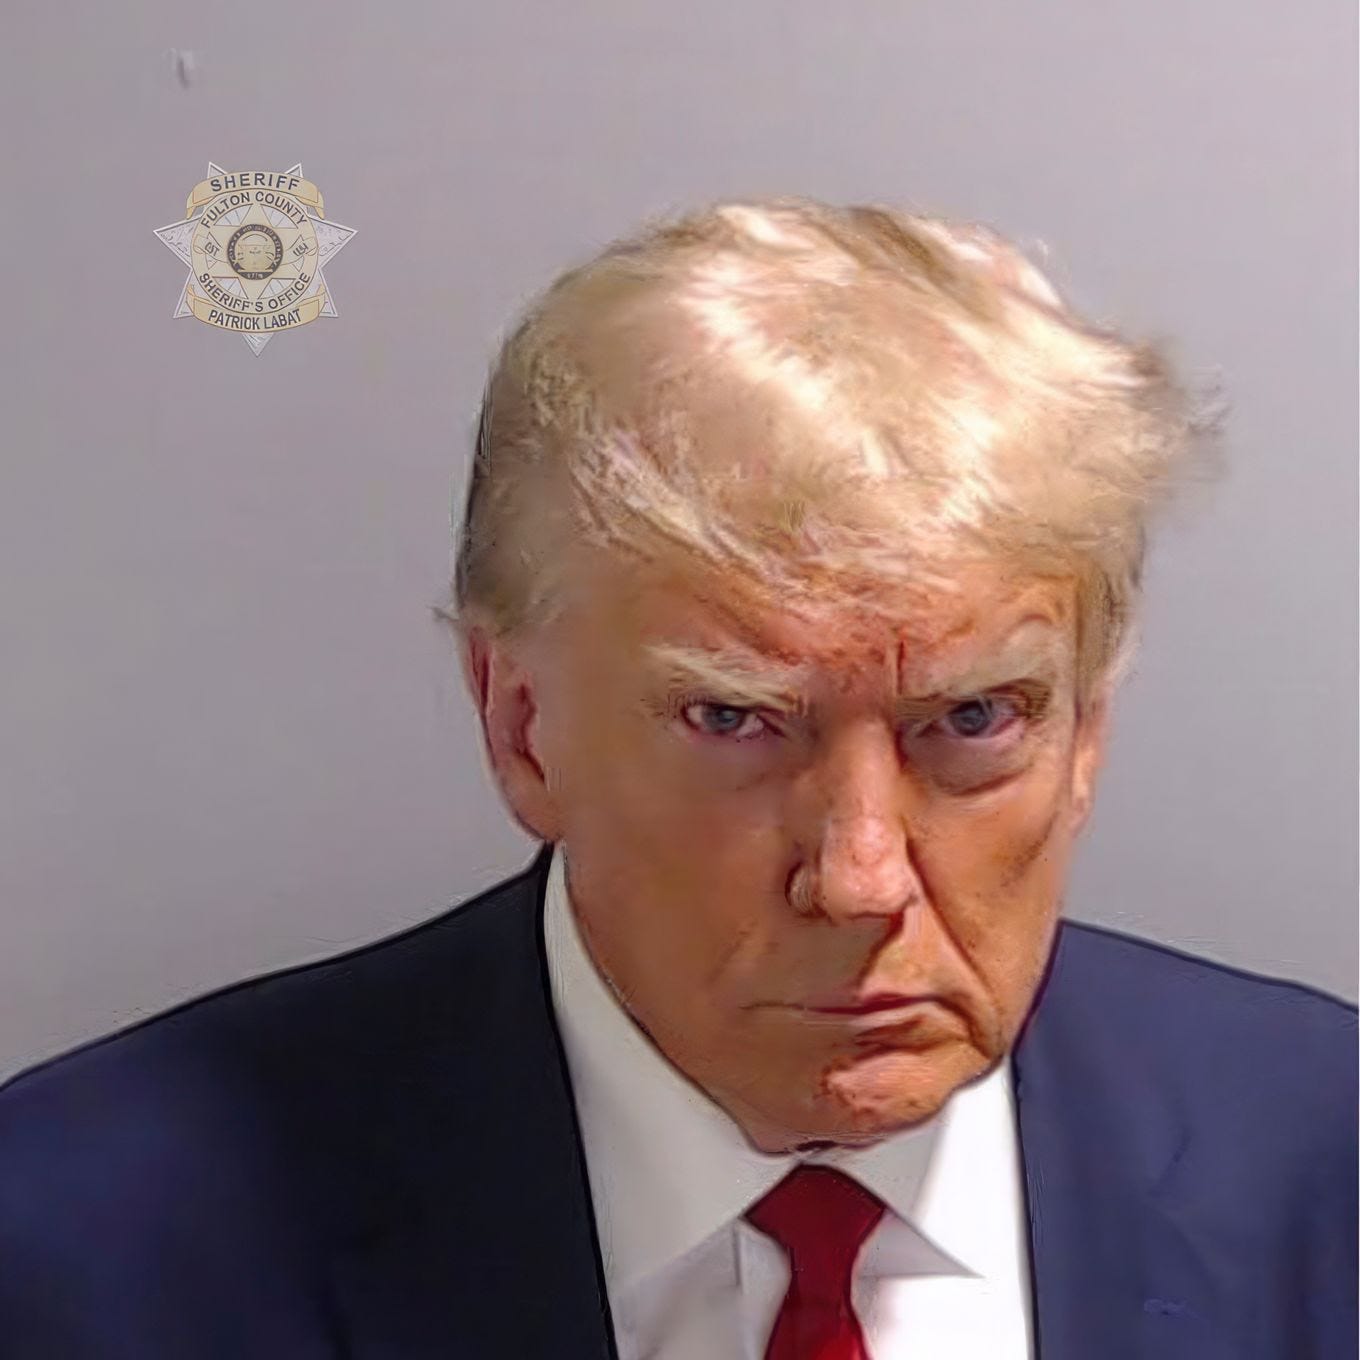 Trump's booking photo. (Fulton County Sheriff’s Office/AP)